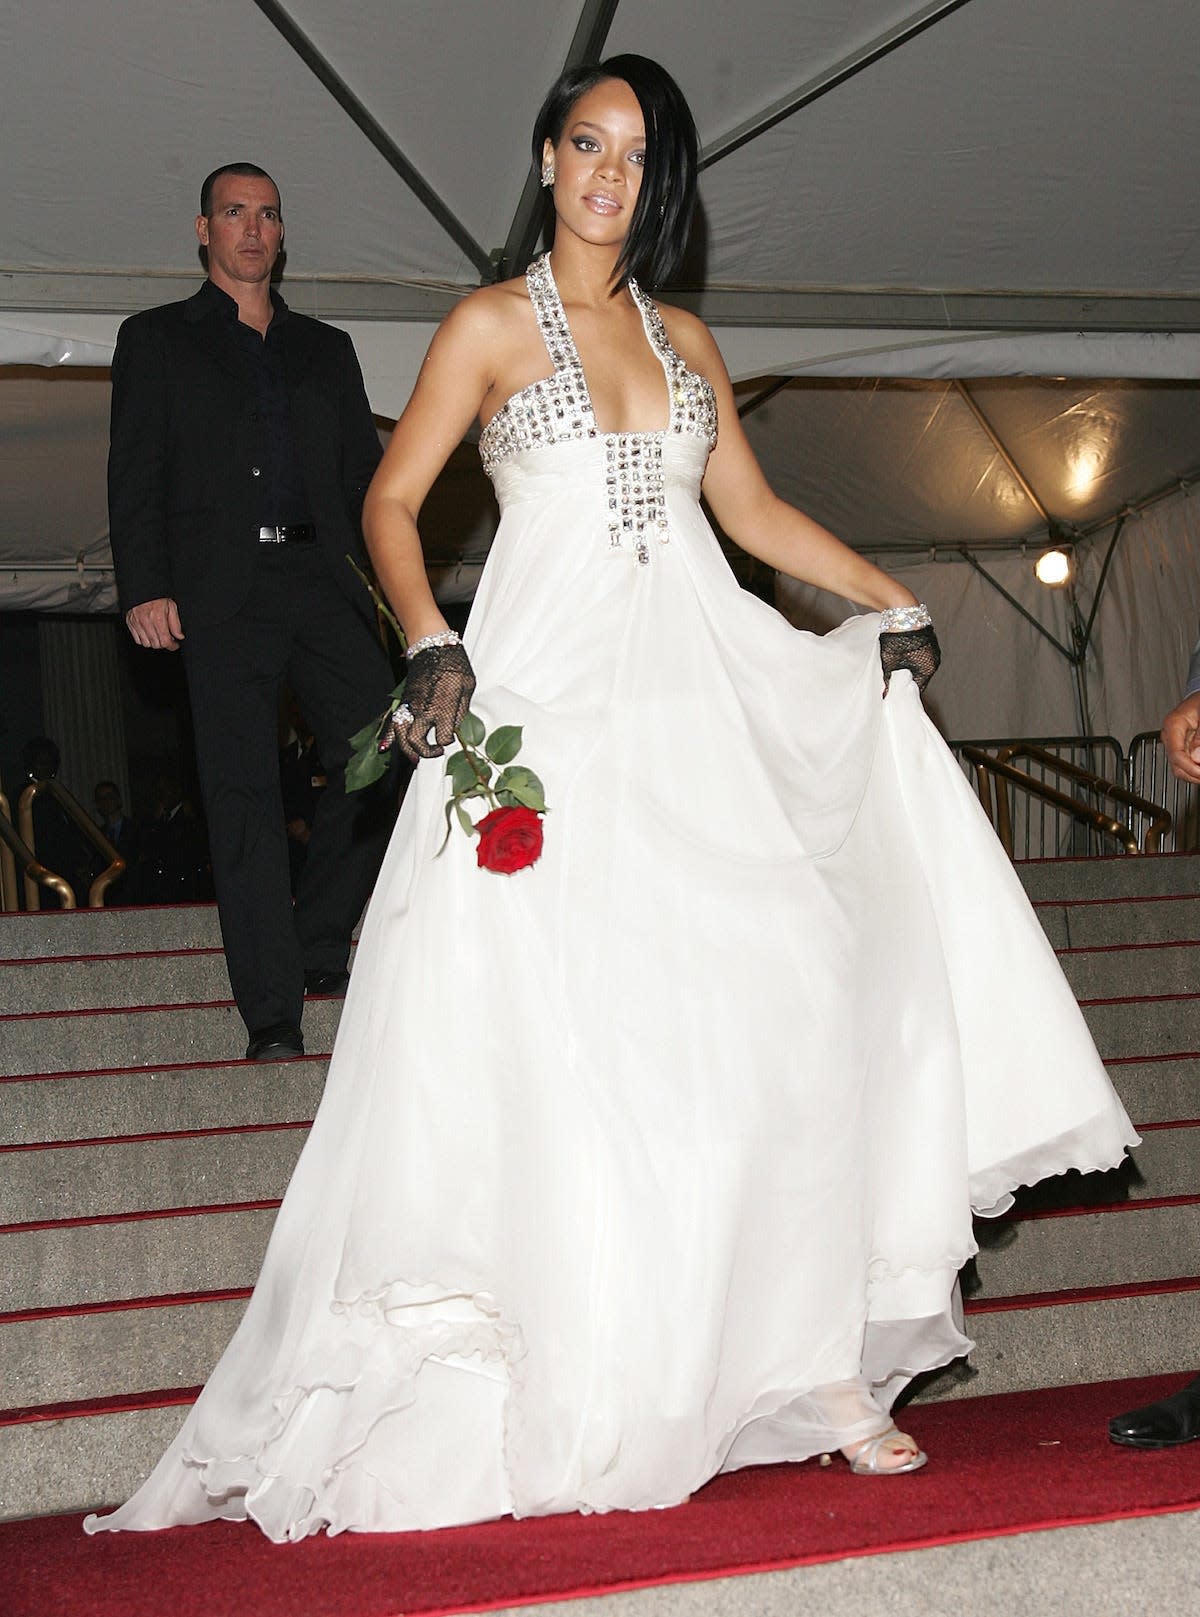 Rihanna wore a white gown with a plunging halter neck to the 2007 Met Gala.